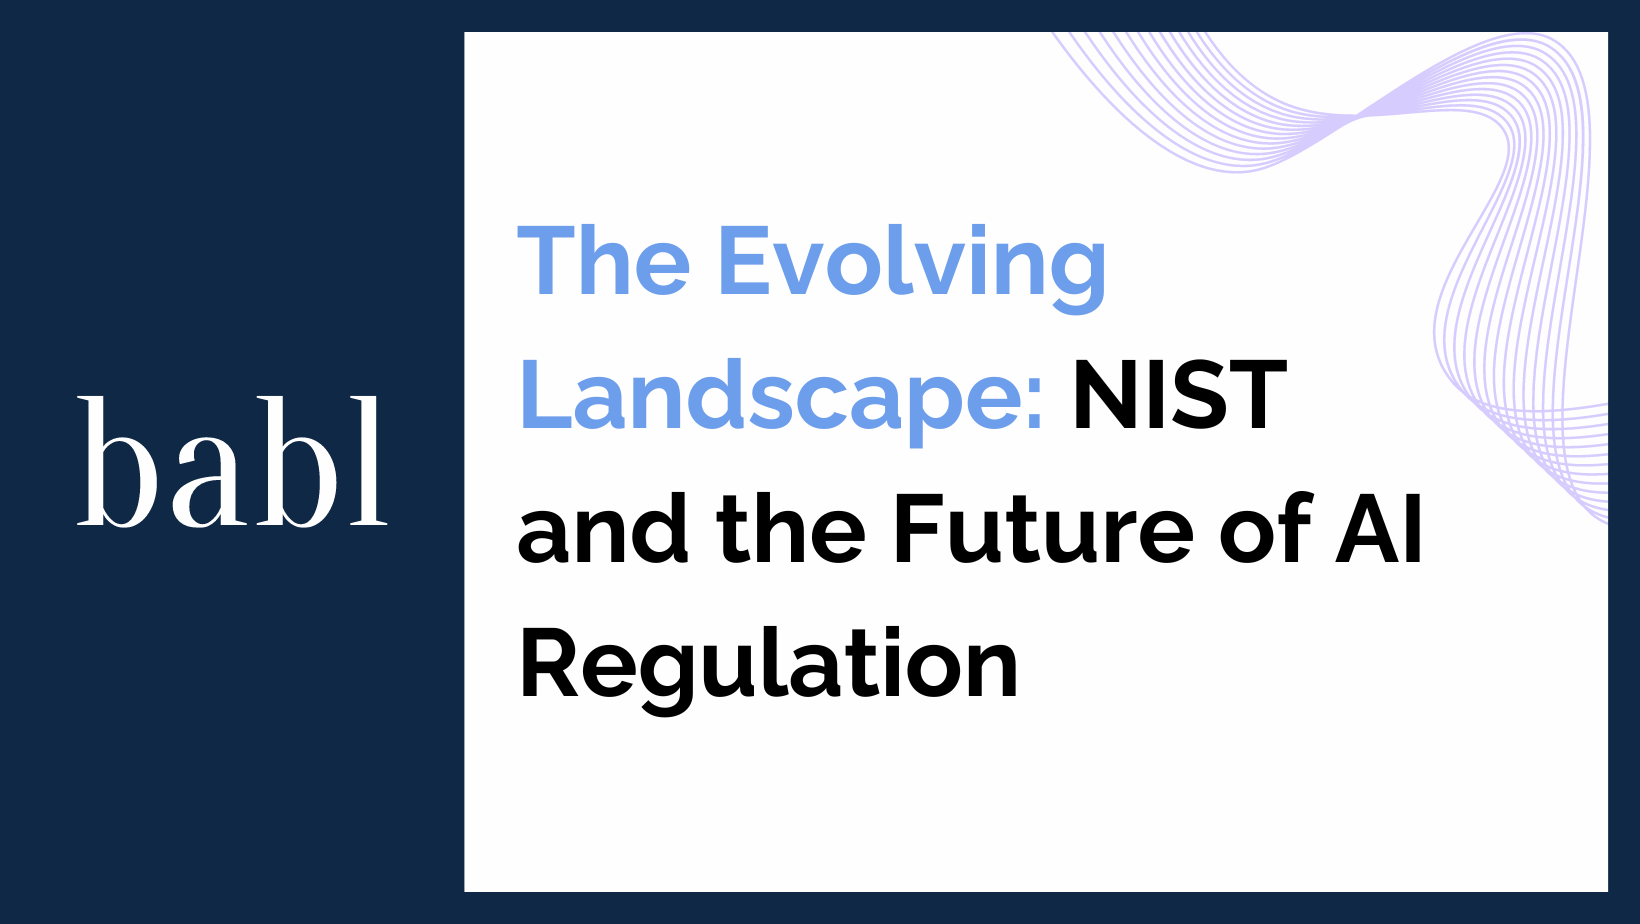 The Evolving Landscape: NIST and the Future of AI Regulation